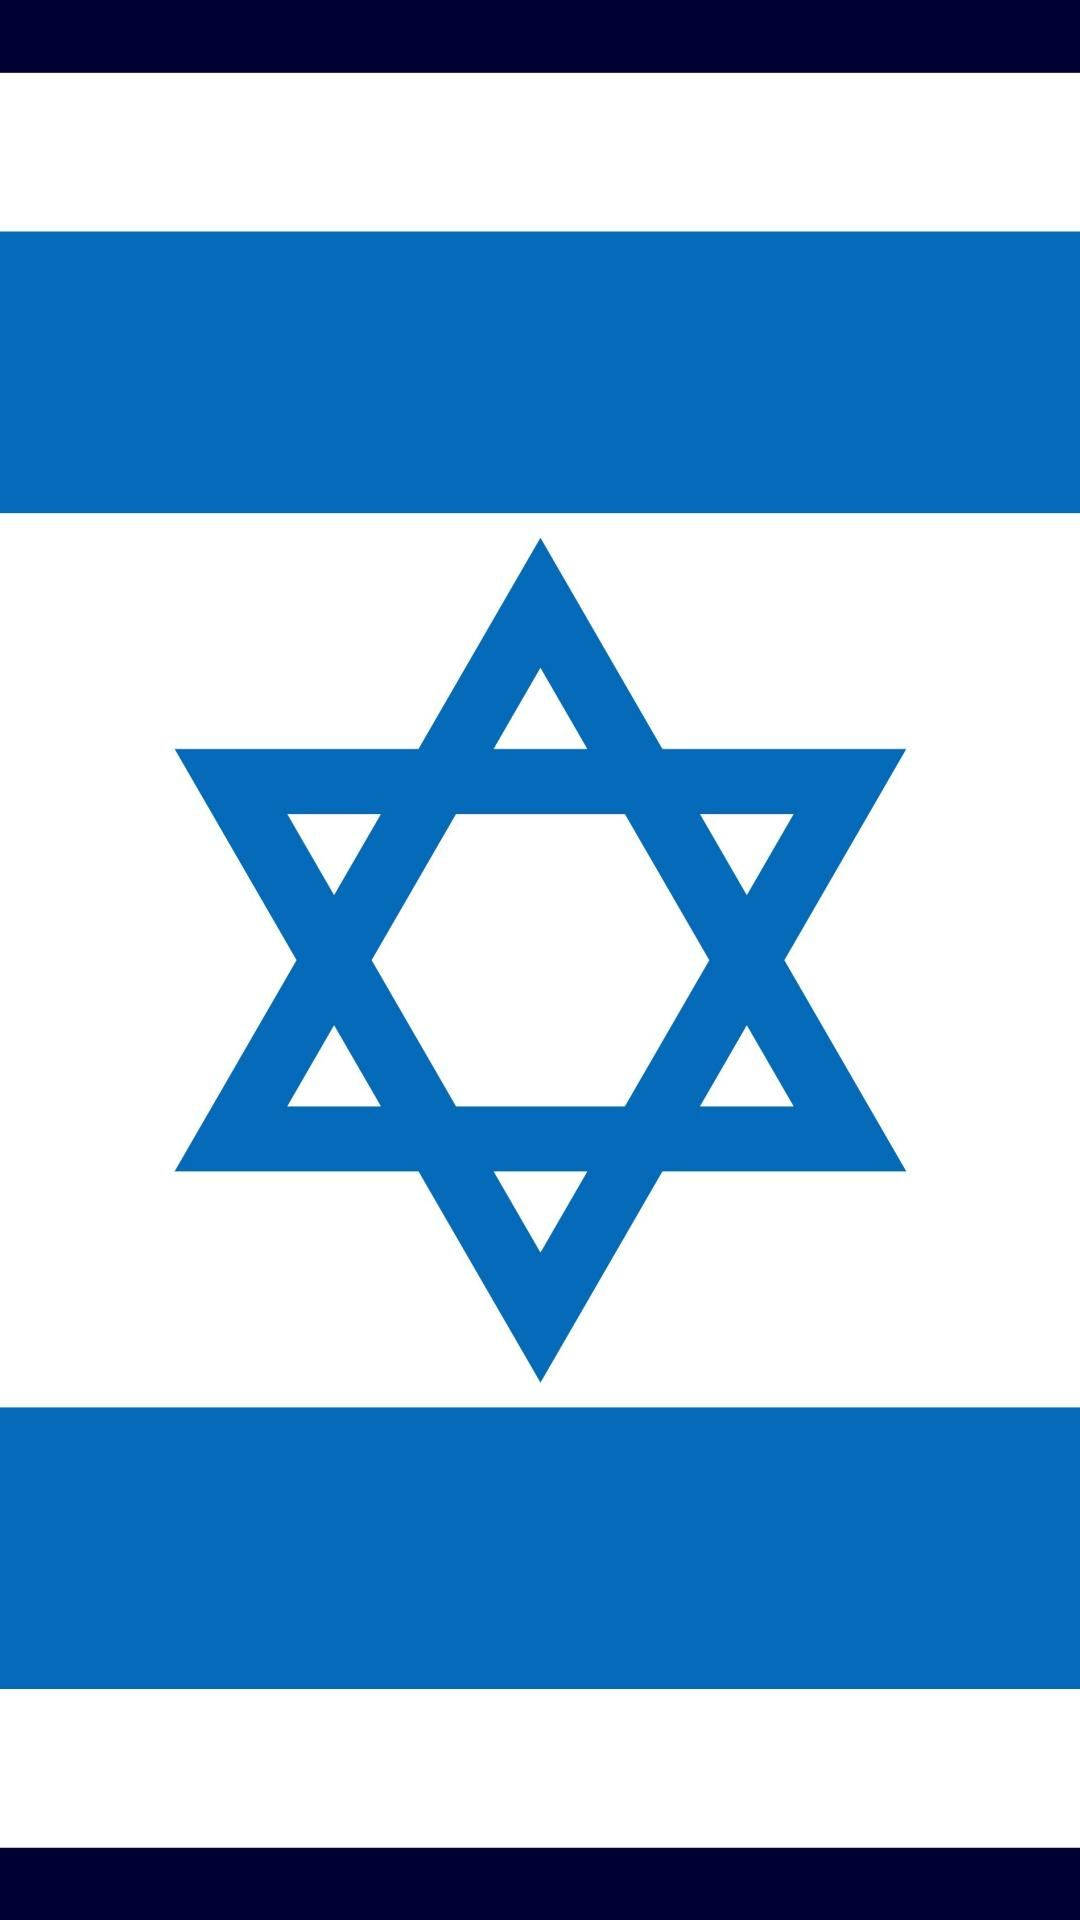 The National Flag Of Israel Displaying The Star Of David Background